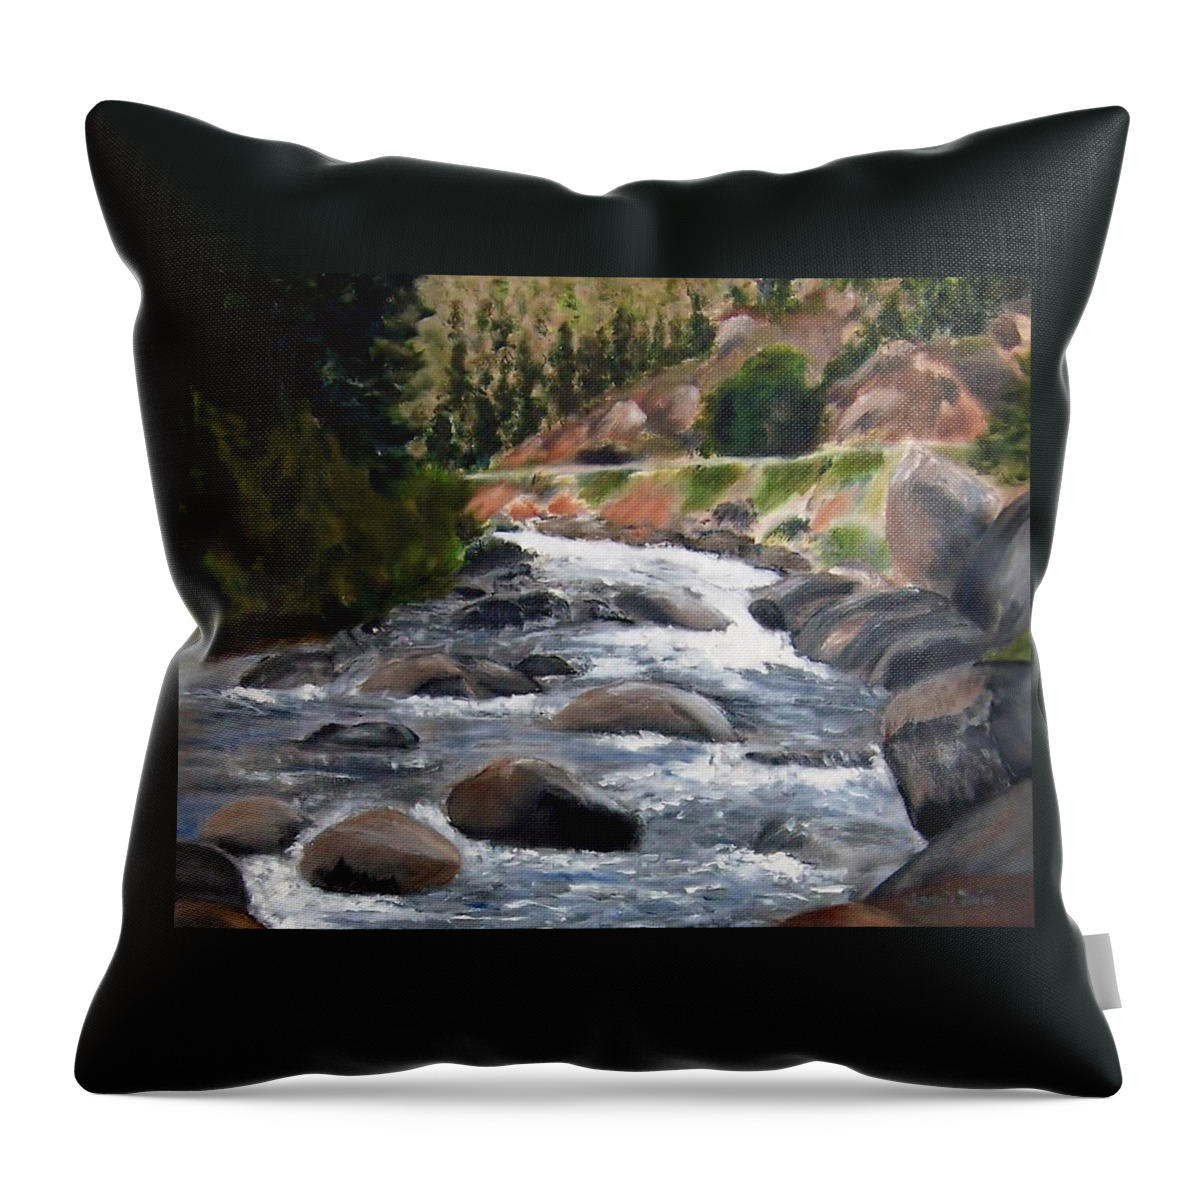 Water Throw Pillow featuring the painting Colorado Rapids by Jamie Frier